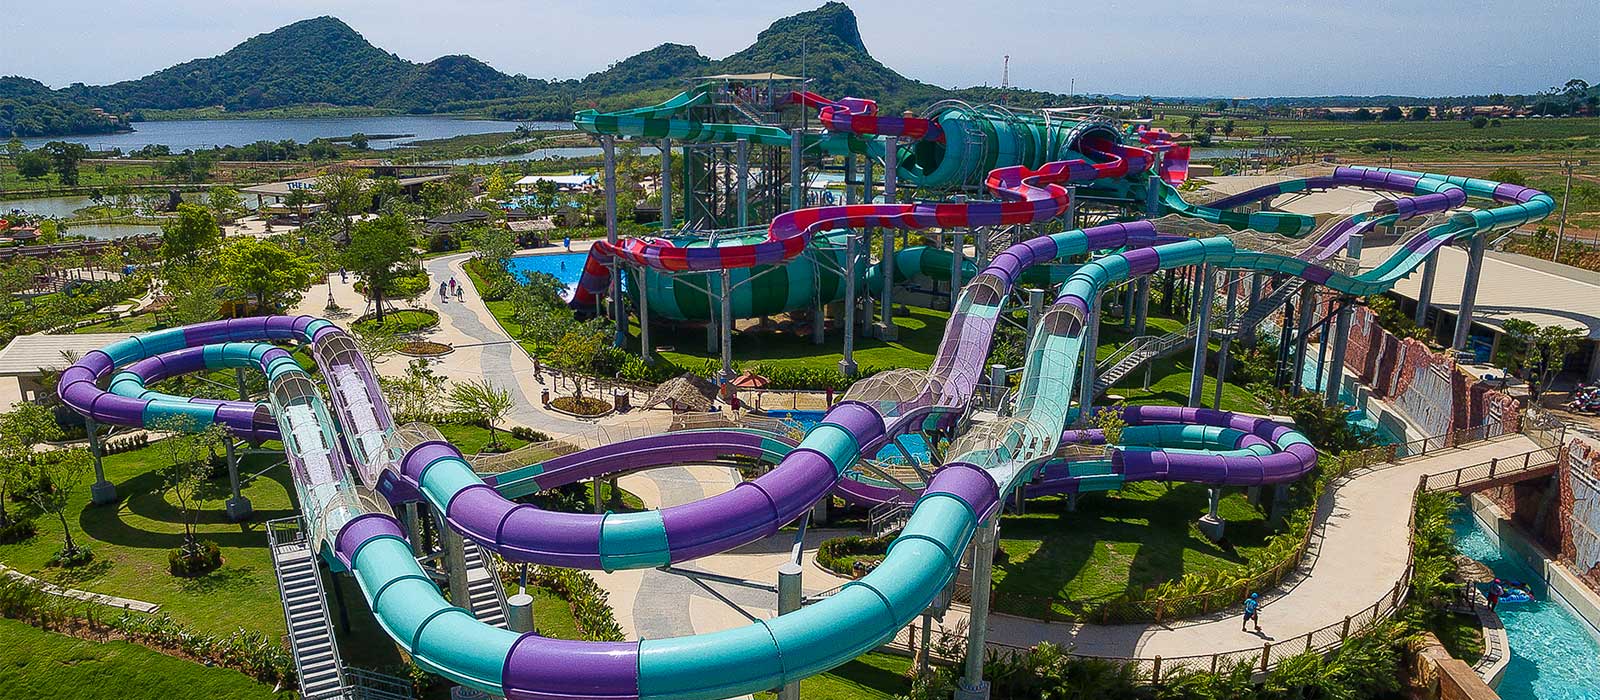 Three of Thailand’s fun-filled water parks